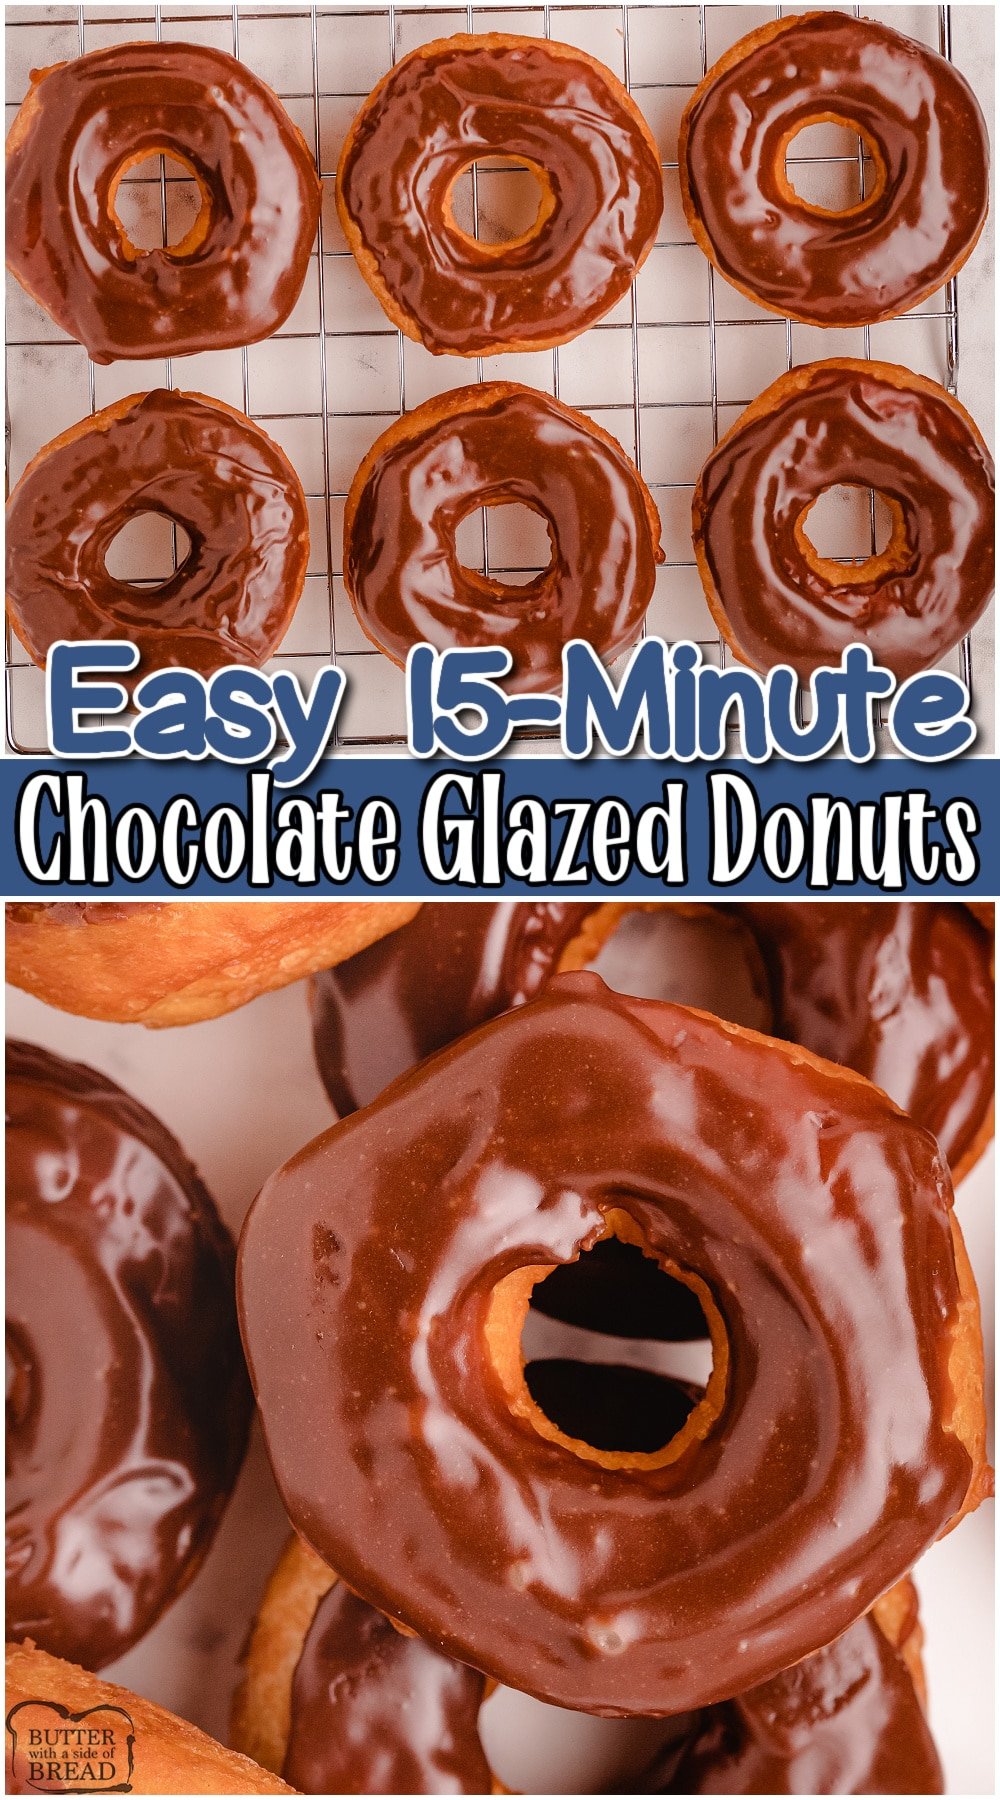 Chocolate Covered Donuts made quick & easy with crescent dough & delicious buttery chocolate glaze. Better than store-bought; you'll make them again & again!